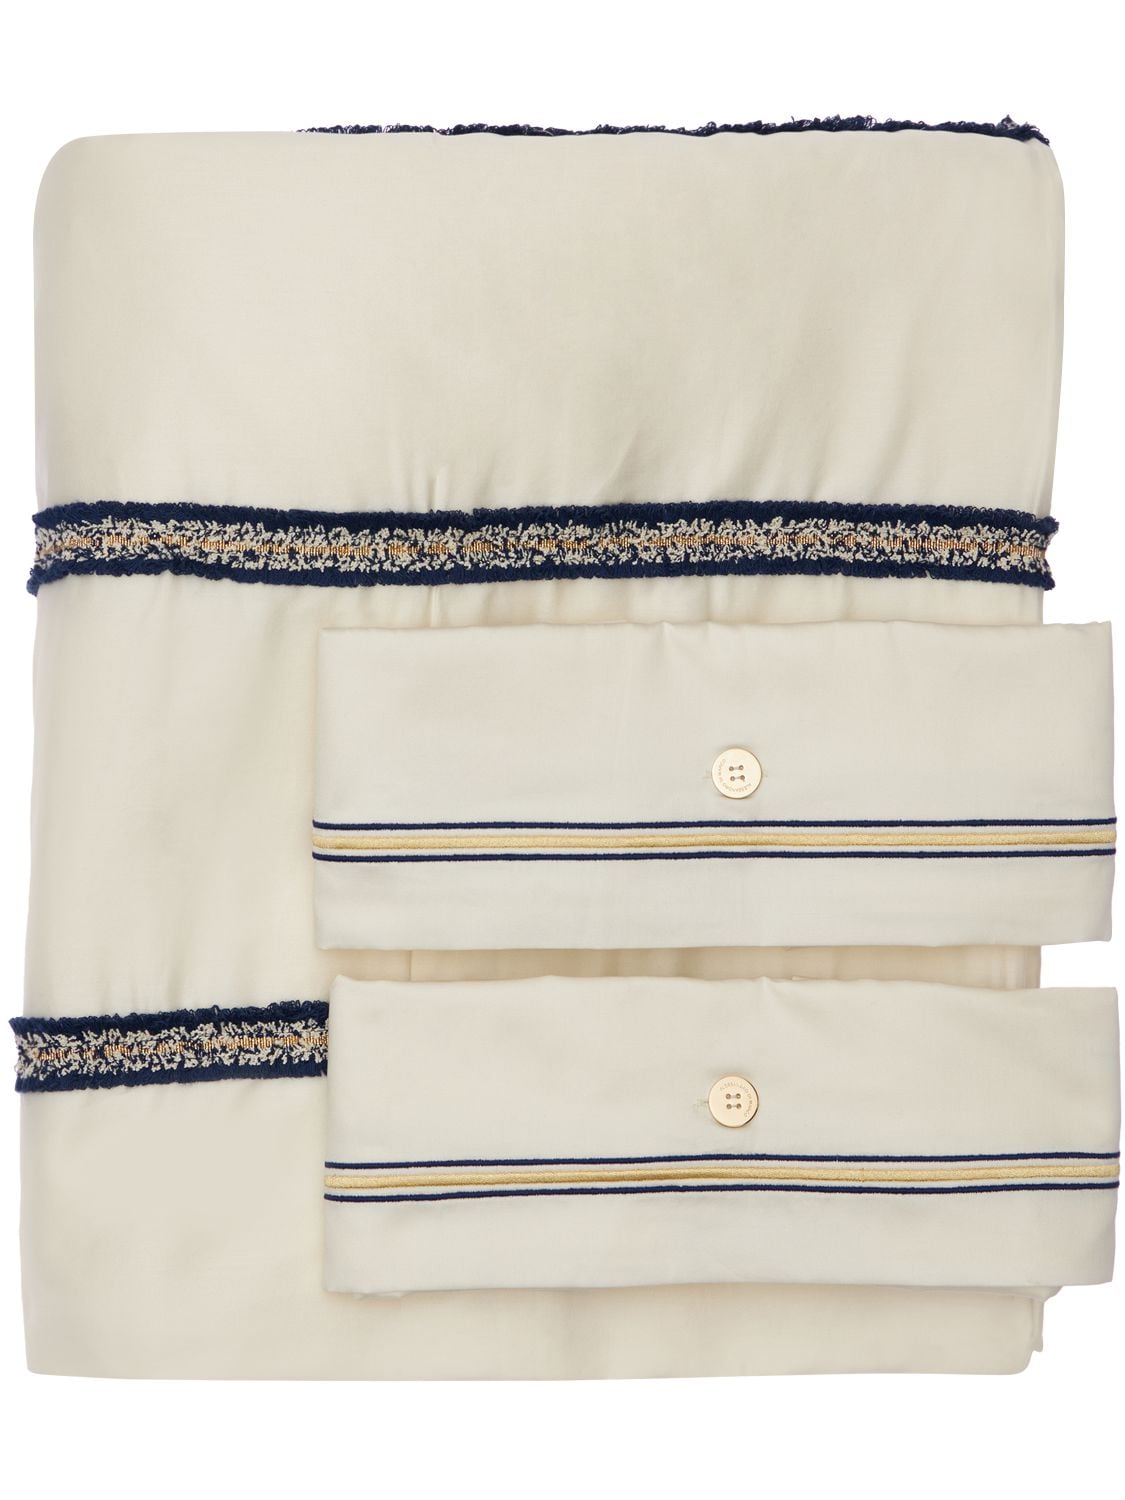 Alessandro Di Marco Beaded Cotton Satin Duvet Cover Set In White,blue